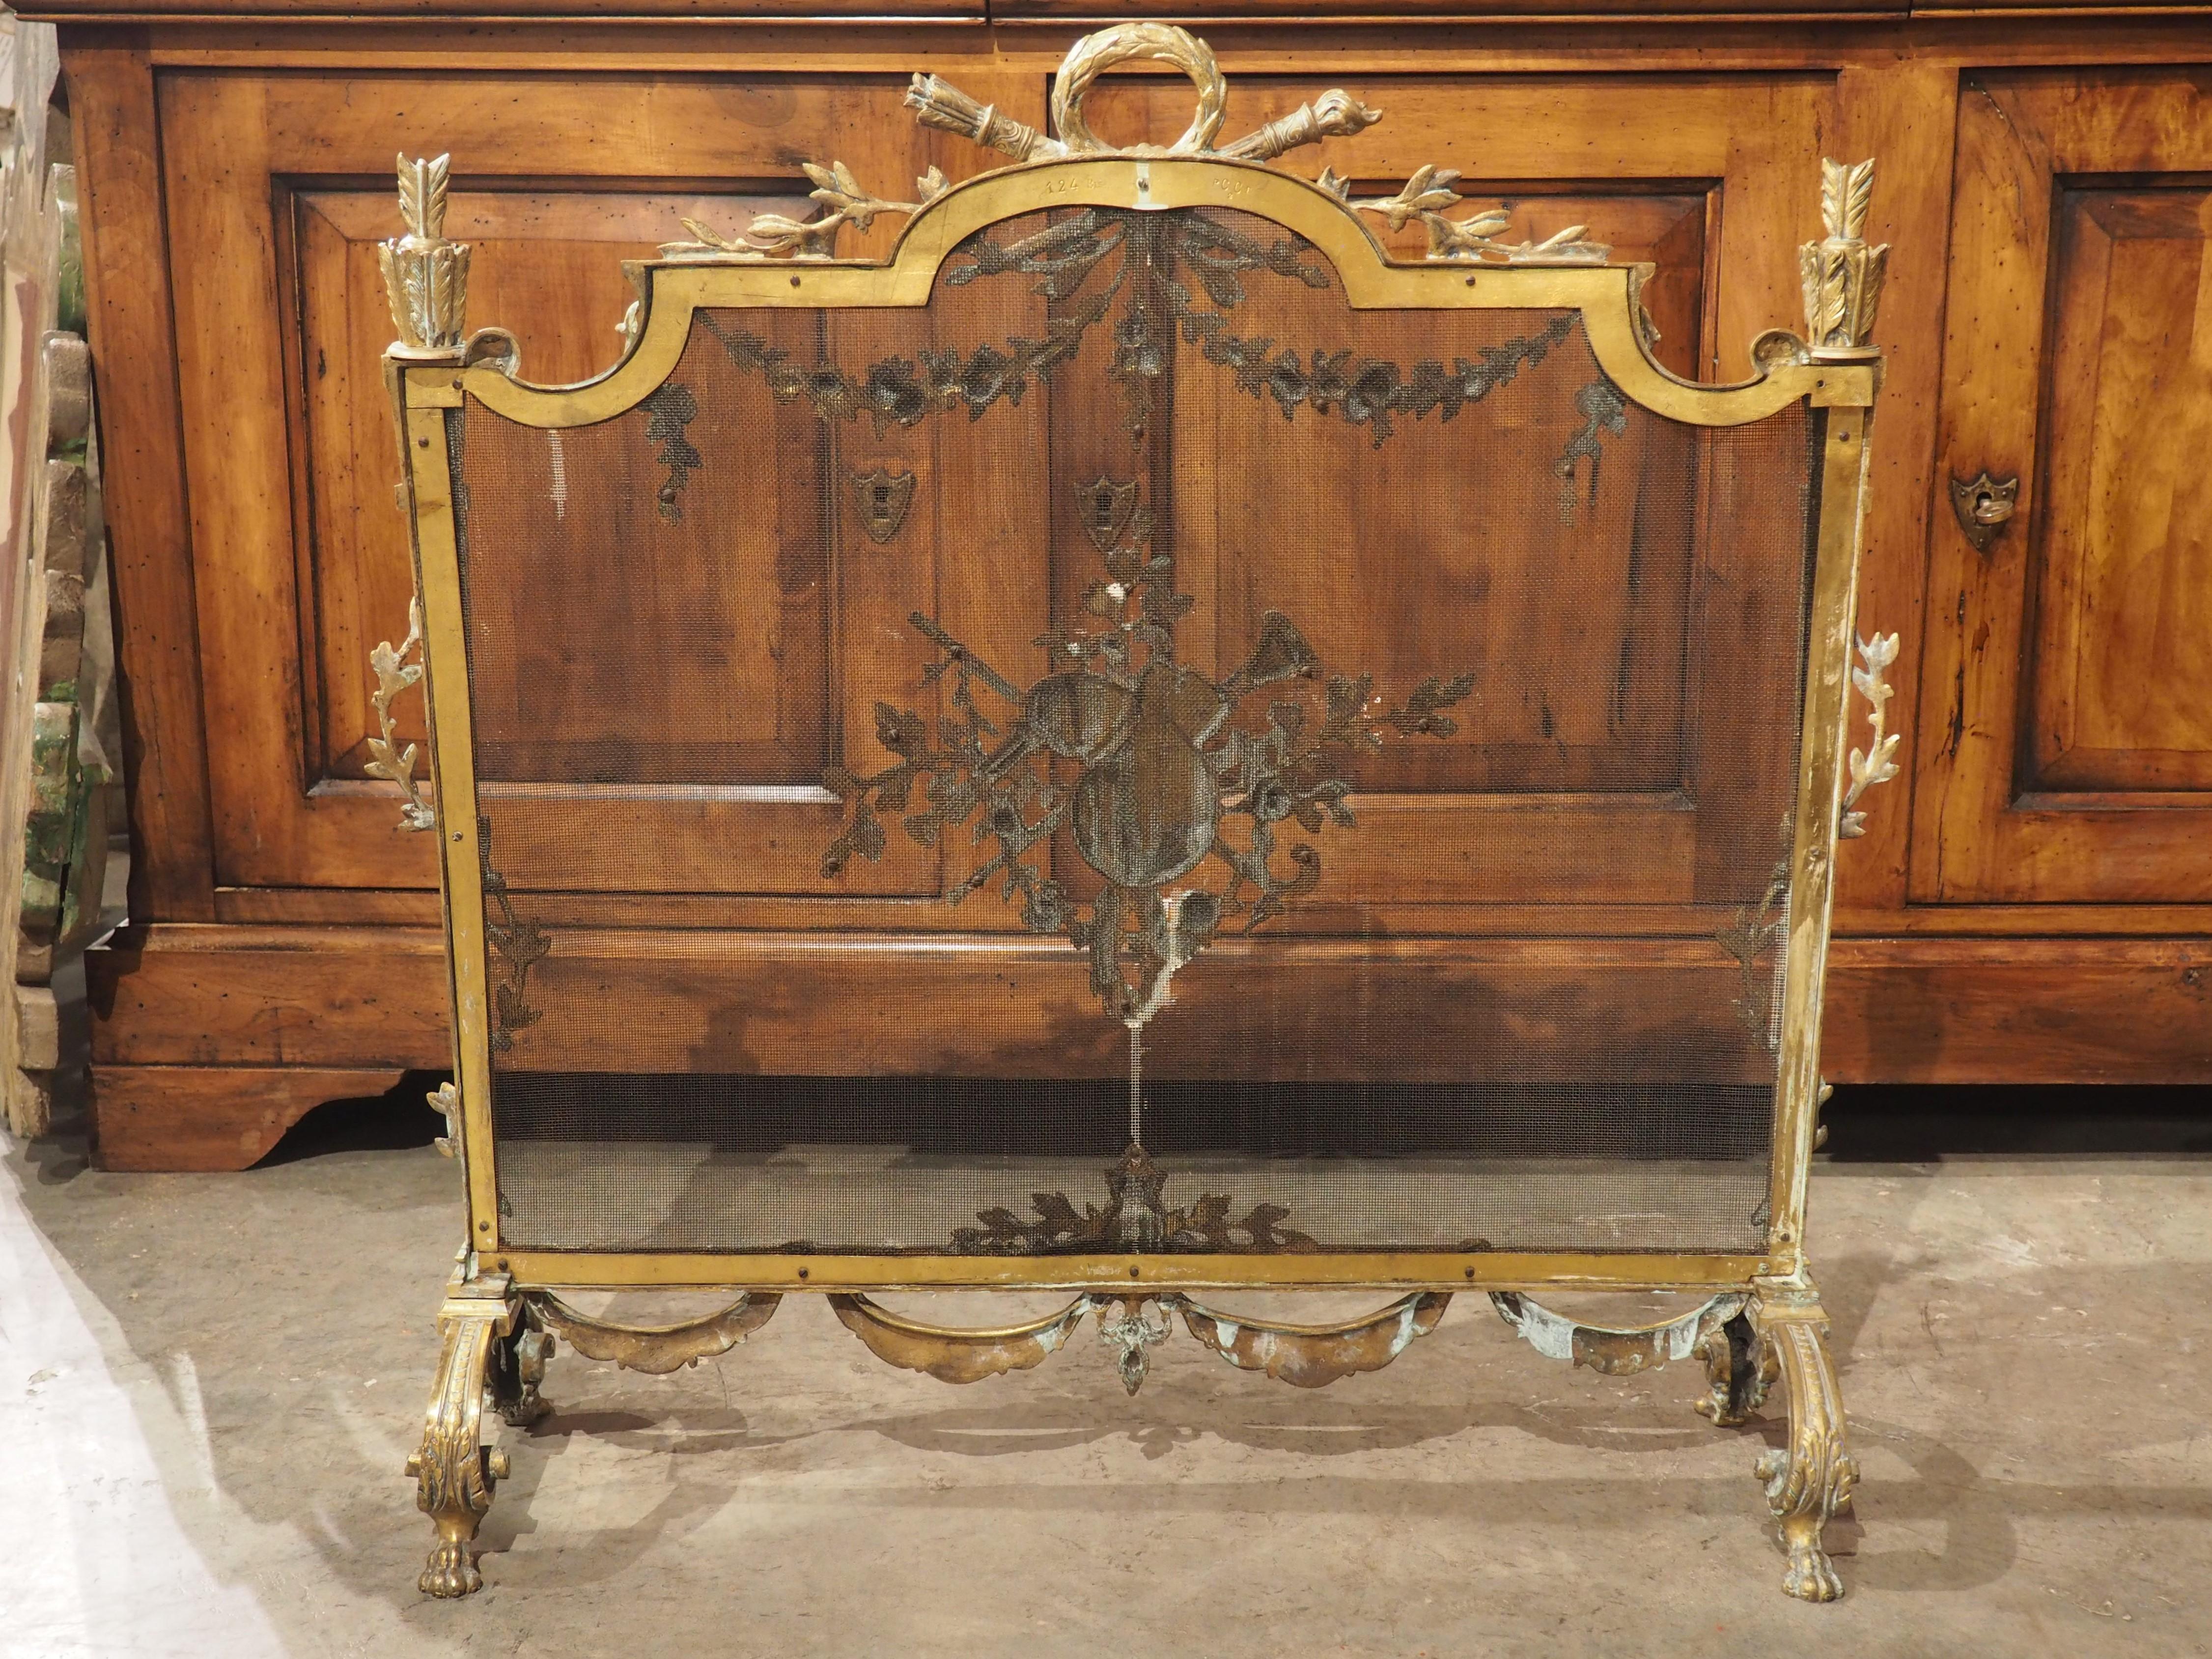 Hand-crafted in France, circa 1880, this gilt bronze firescreen is embellished with Louis XVI-style motifs. A very fine iron mesh is surrounded by a bronze frame set on two high arching legs adorned with imbricated disks, volute leaves, and a pair